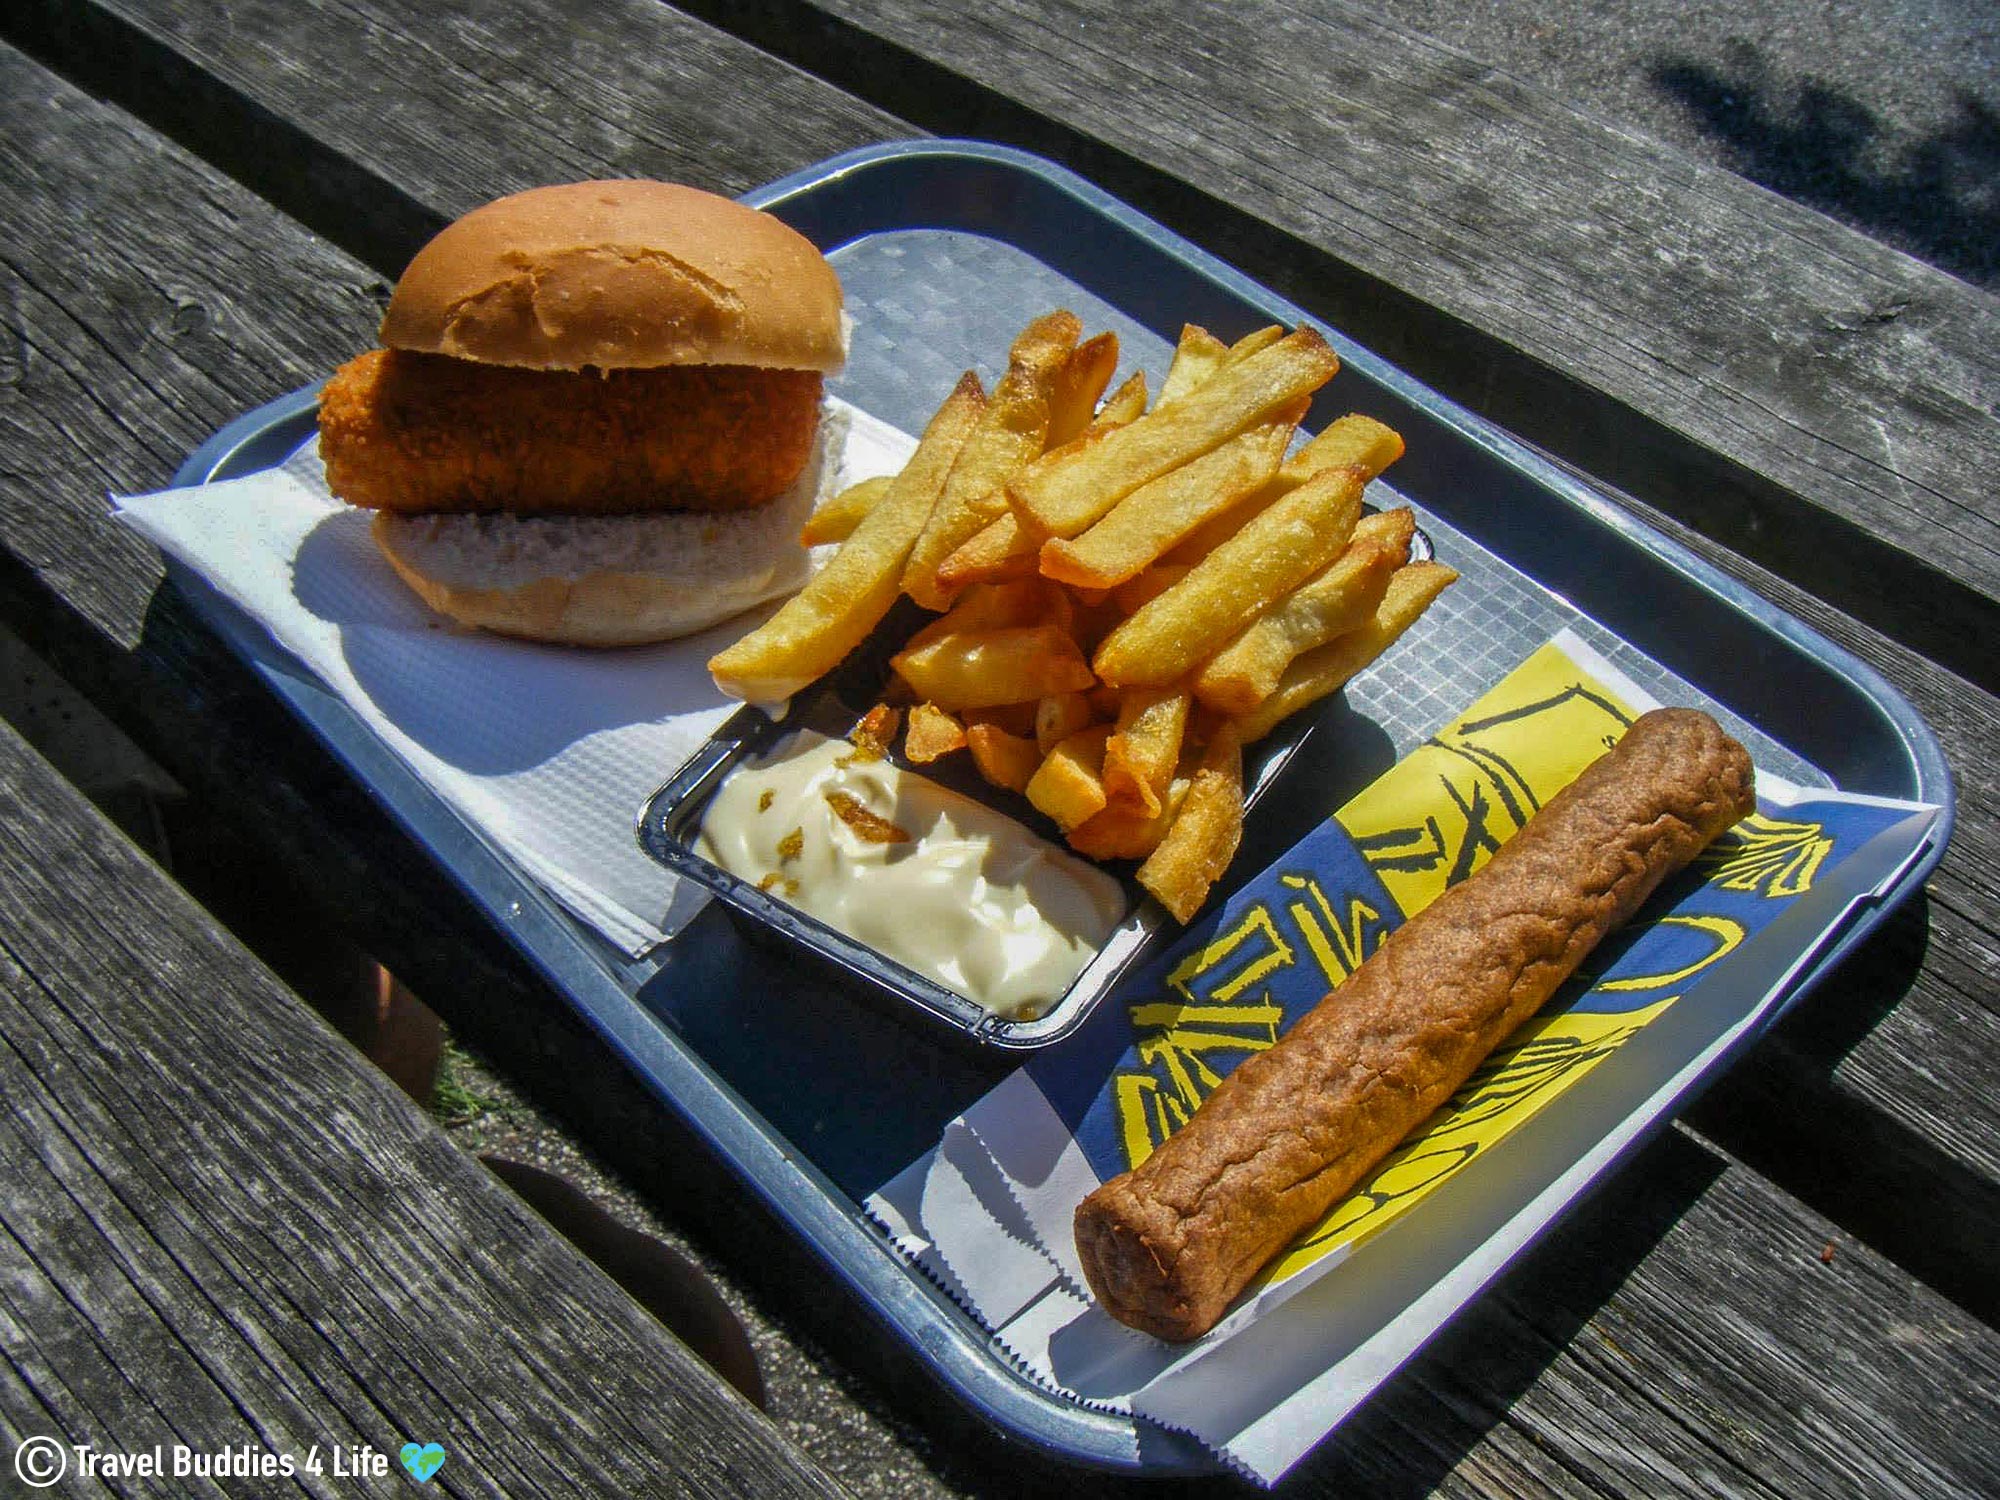 A Yummy Croquette, Fries And Frikondel Snack In The Netherlands, Europe